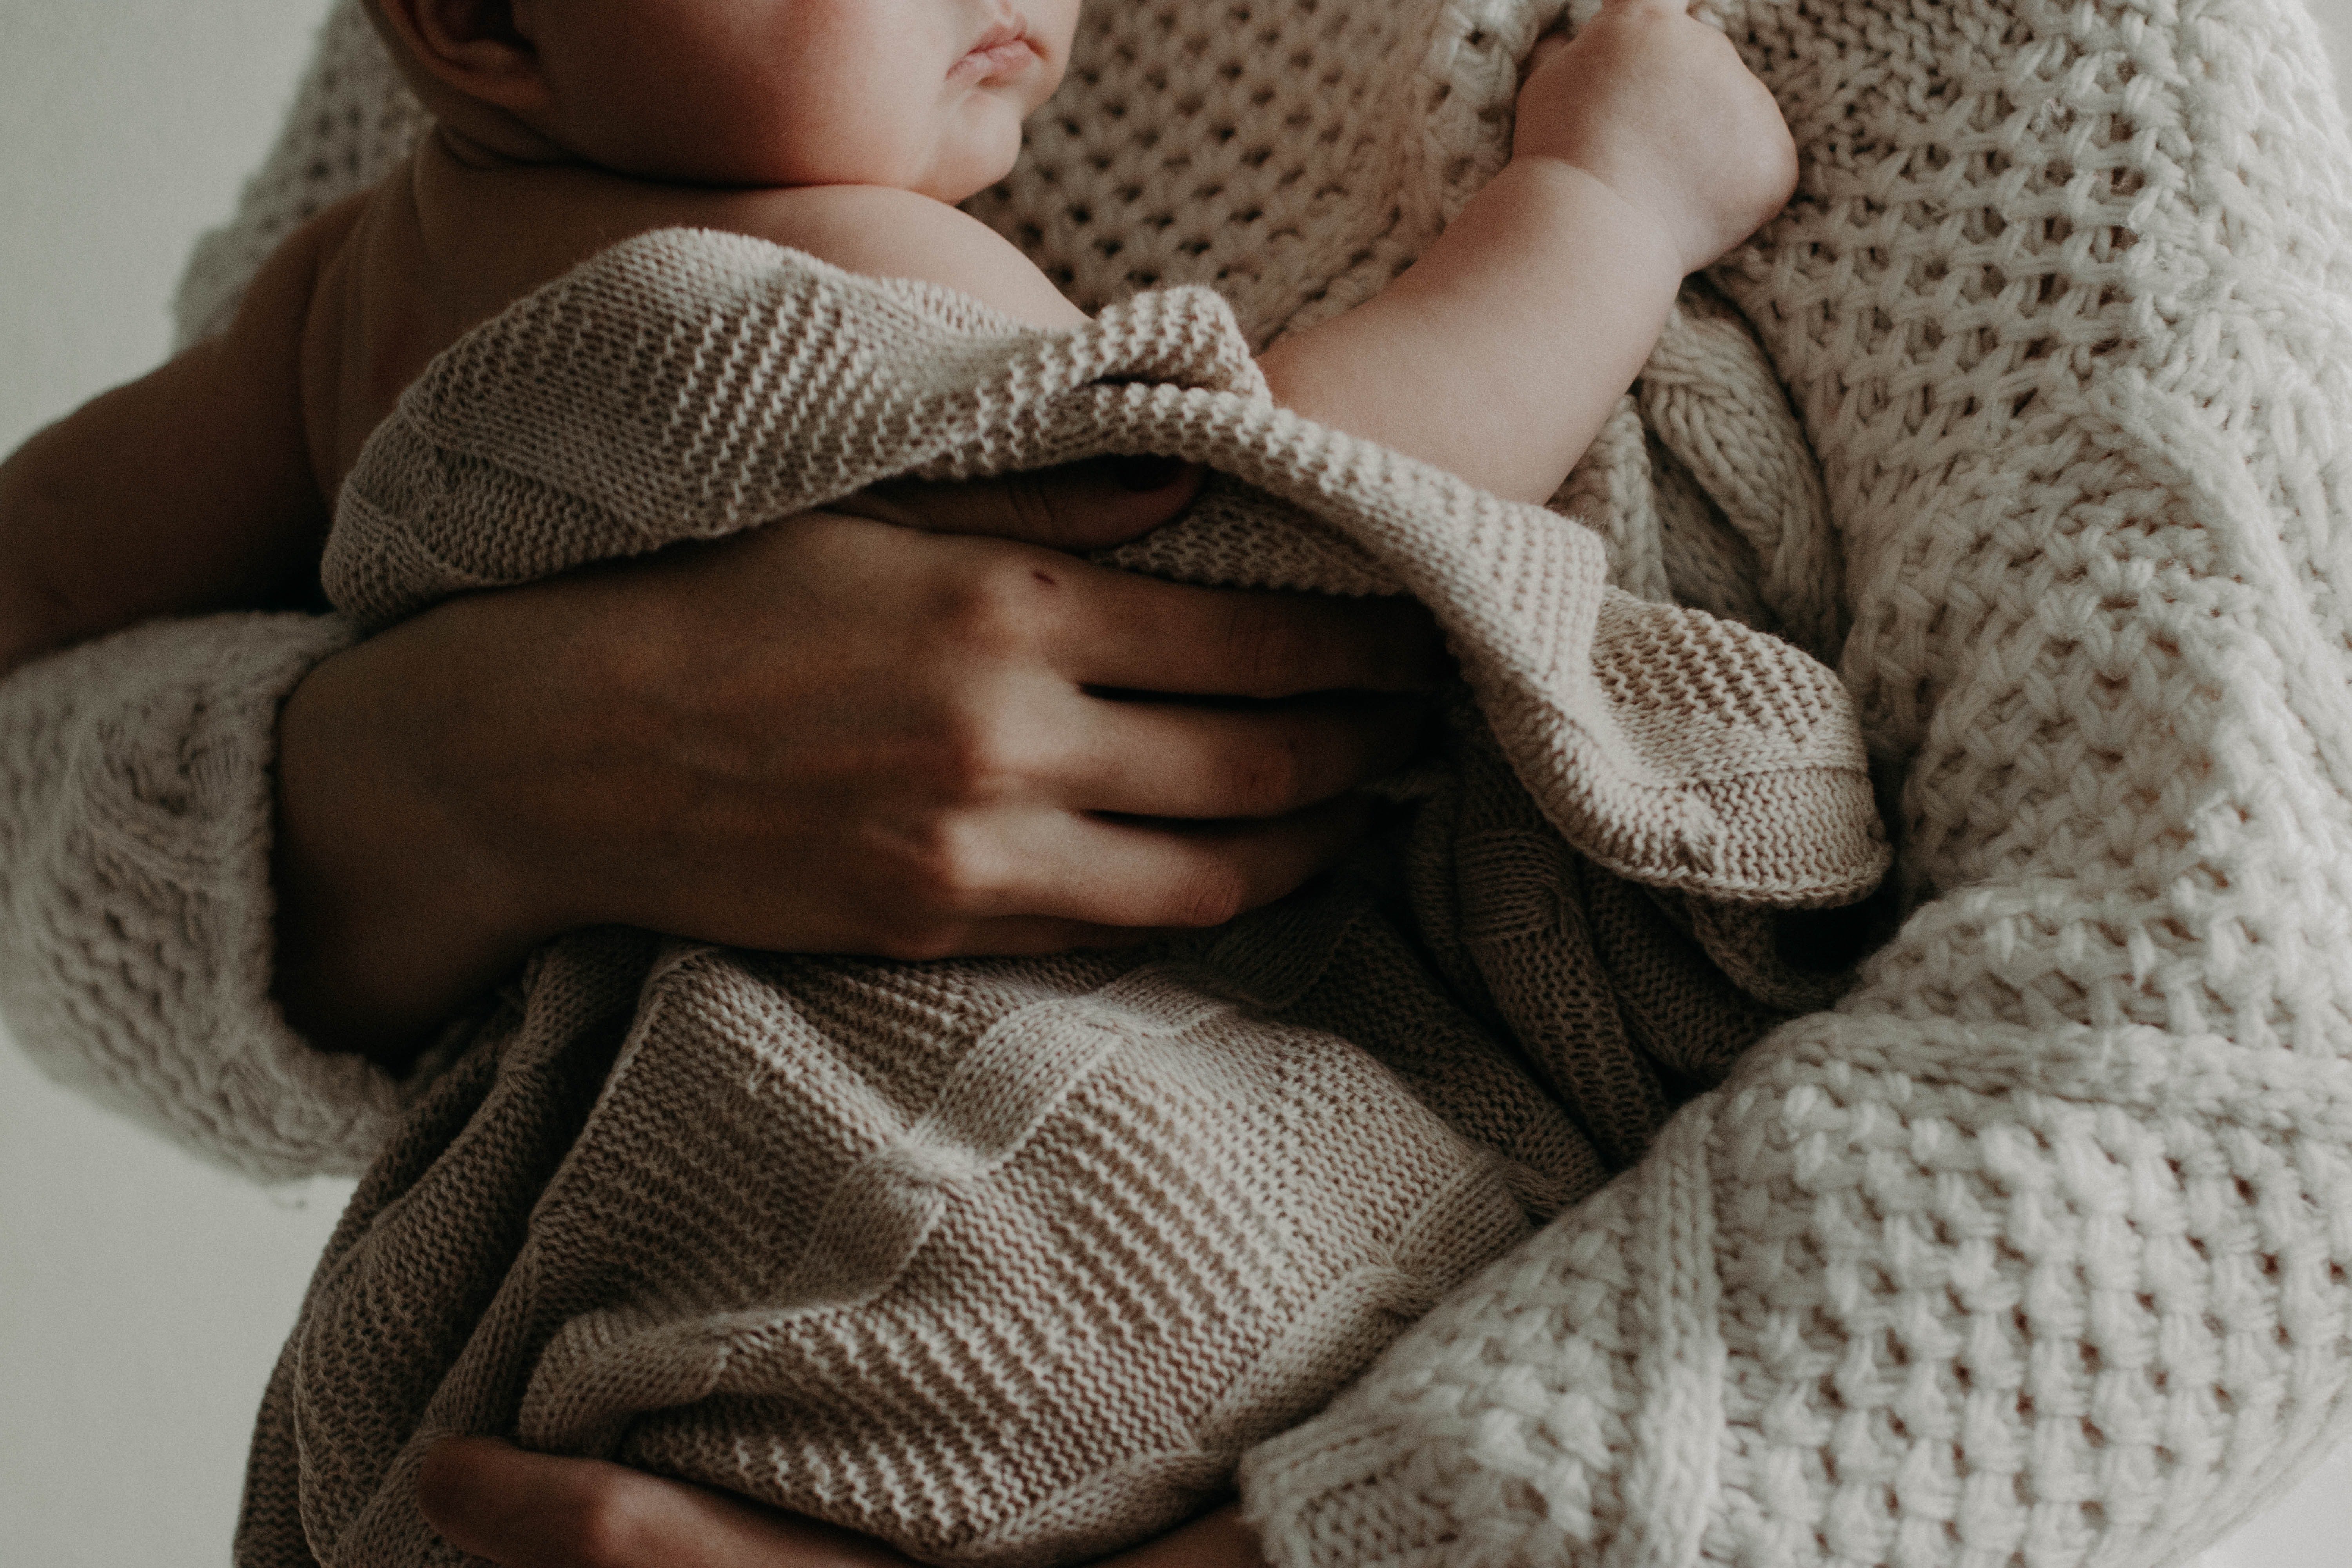 Maria and her child had been surviving in the woods for weeks. | Source: Pexels